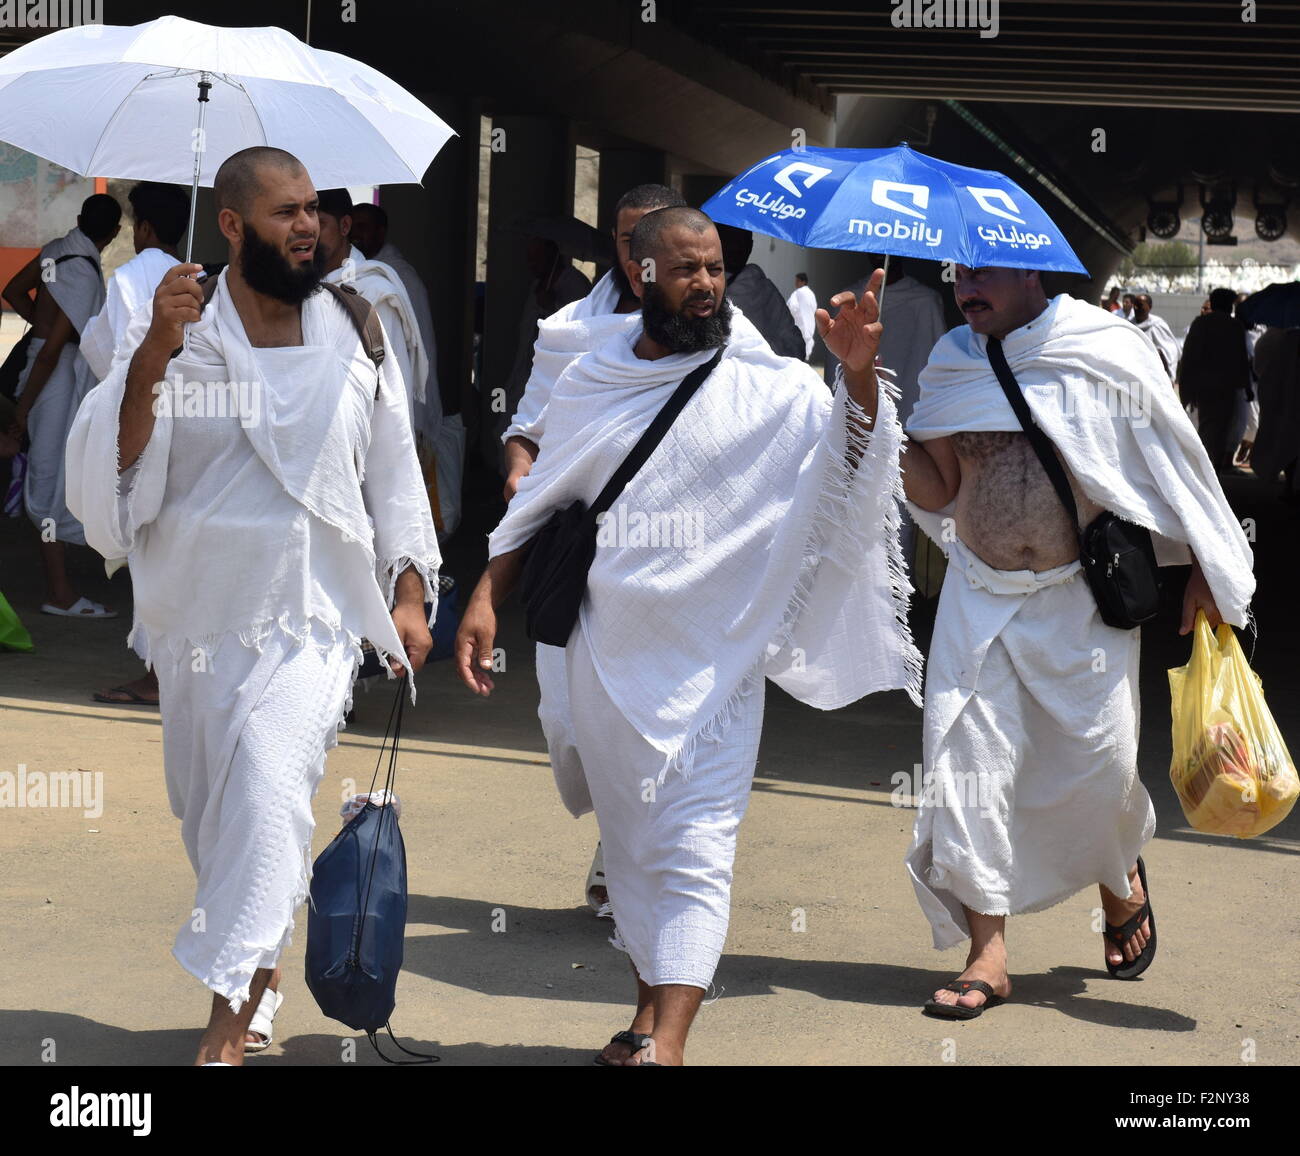 Mecca, Saudi Arabia. 22nd Sep, 2015. Pilgrims walk toward Mina, about seven km from Mecca, in Saudi Arabia, Sept. 22, 2015. According to the rigid Hajj schedule, pilgrims will pray and stay overnight in tents of Mina, before moving on to Arafat, a barren and plain land some 20 km east of Mecca, and then to Muzdalifah, an area between Arafat and Mina, to celebrate Eid al-Adha, or the Feast of Sacrifice. Credit:  Min Junqing/Xinhua/Alamy Live News Stock Photo